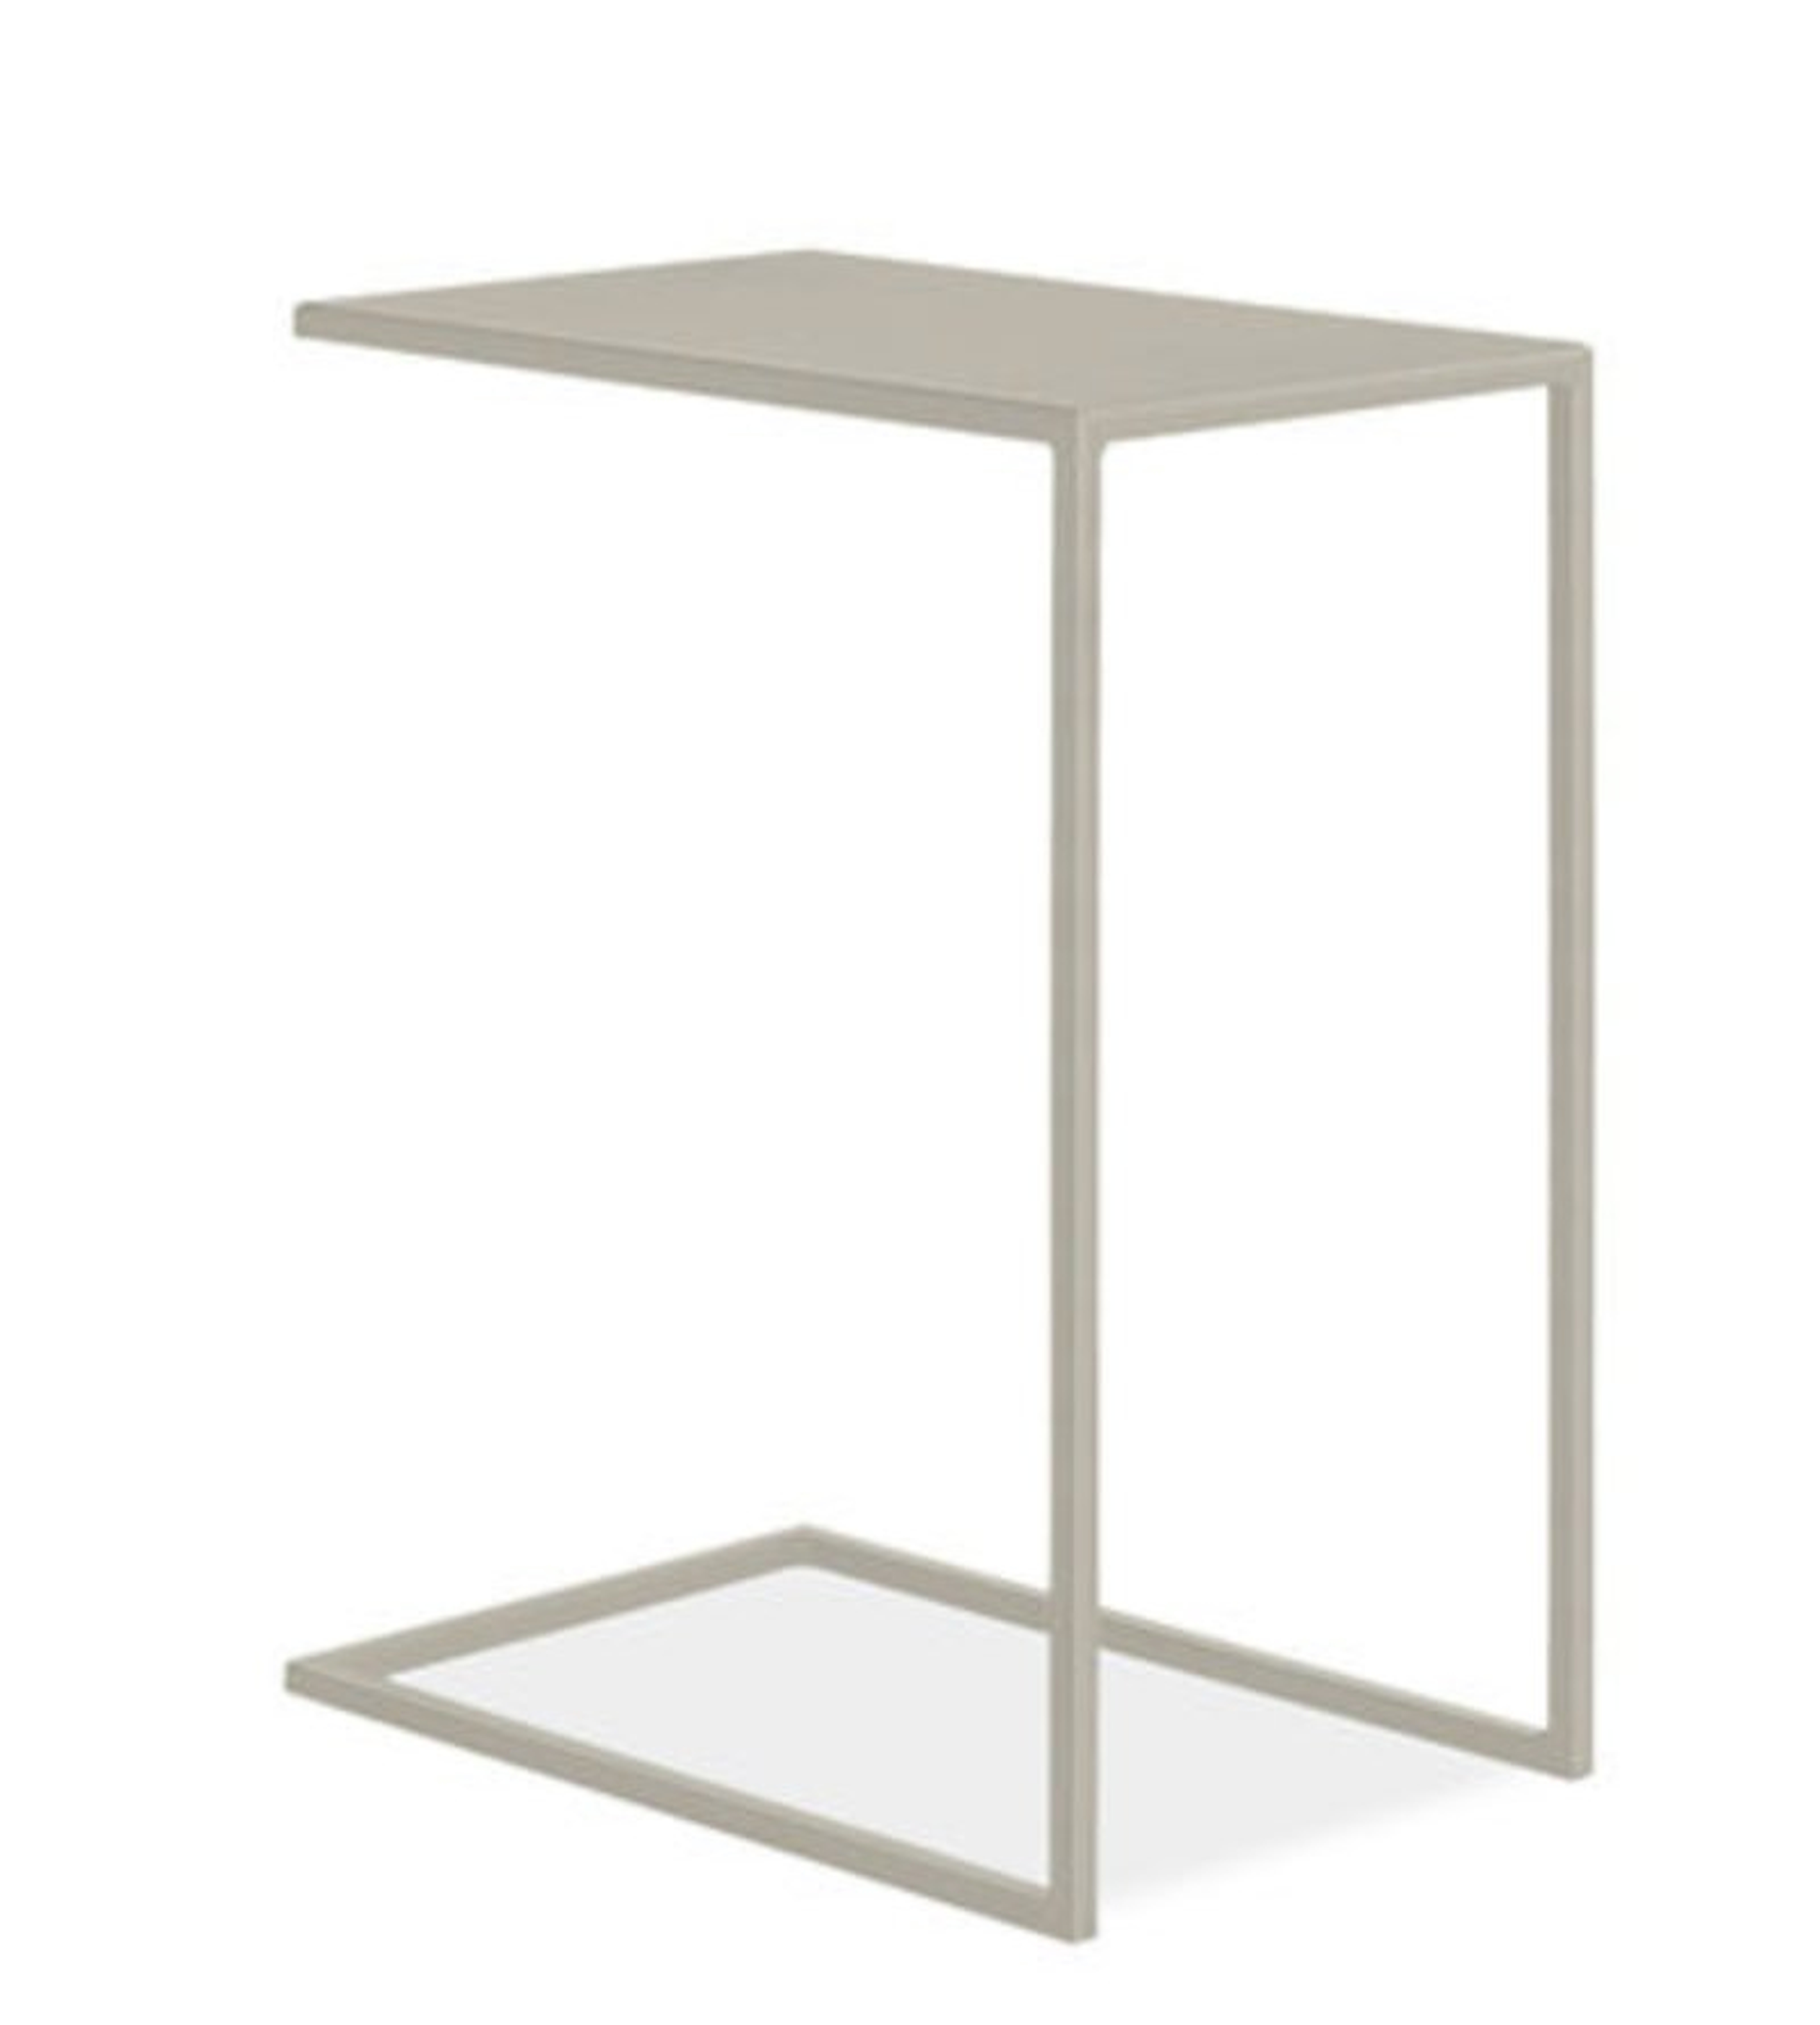 Slim C-Table in Colors Taupe - Room & Board